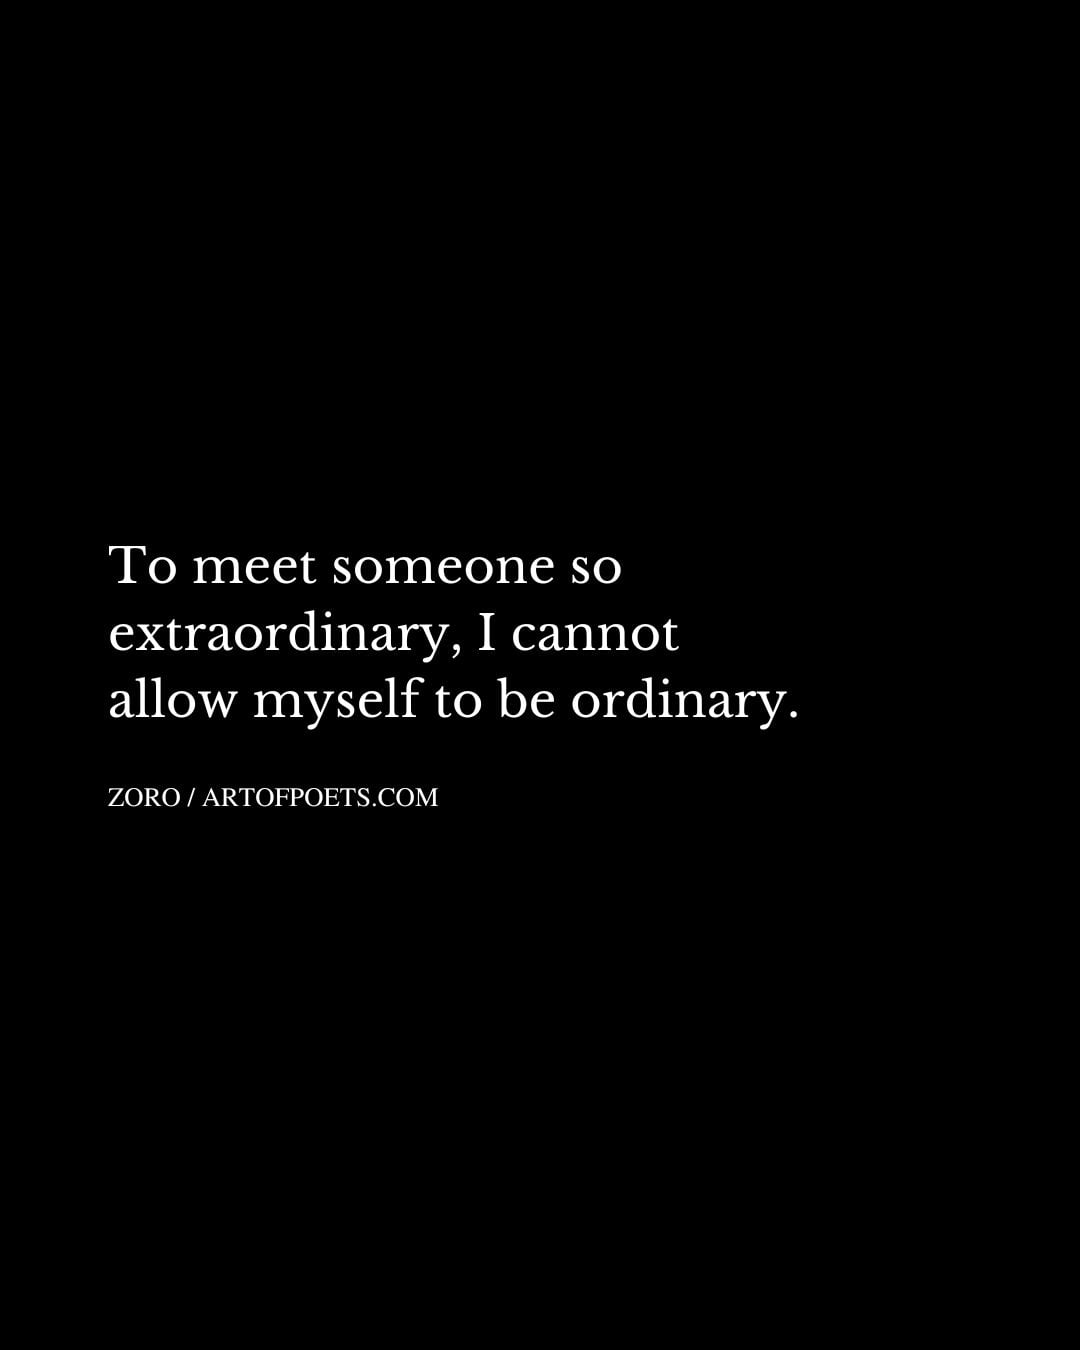 To meet someone so extraordinary I cannot allow myself to be ordinary